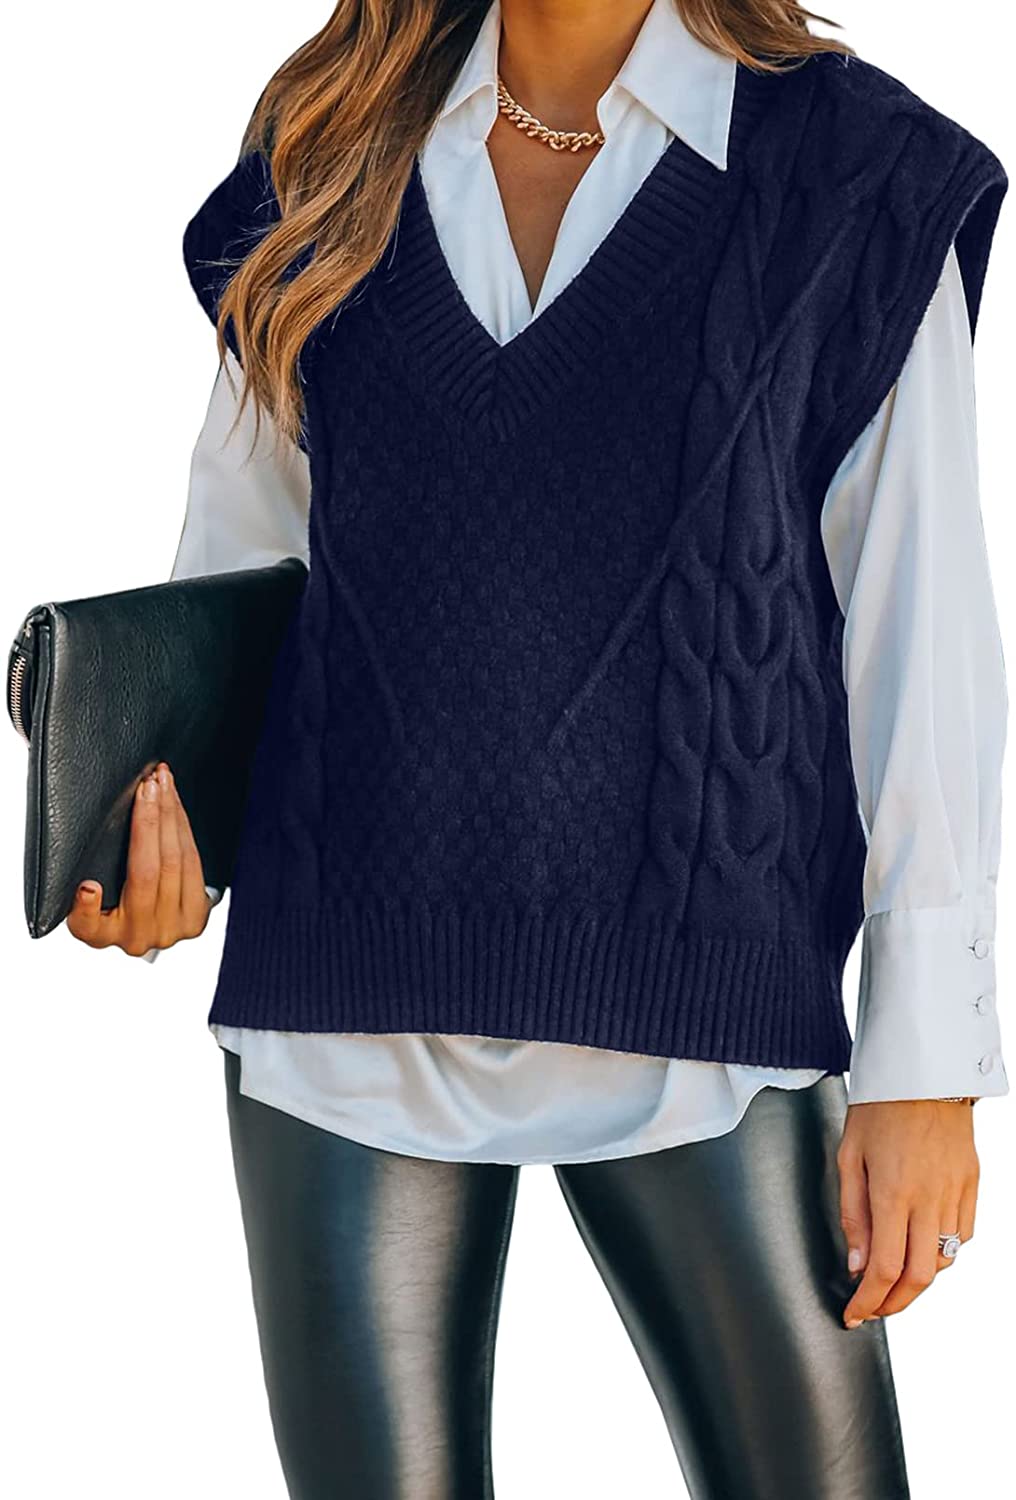 FARYSAYS Women's Sweater Vests V Neck Sleeveless Casual Oversized Knit Sweater Vest Pullover Tops